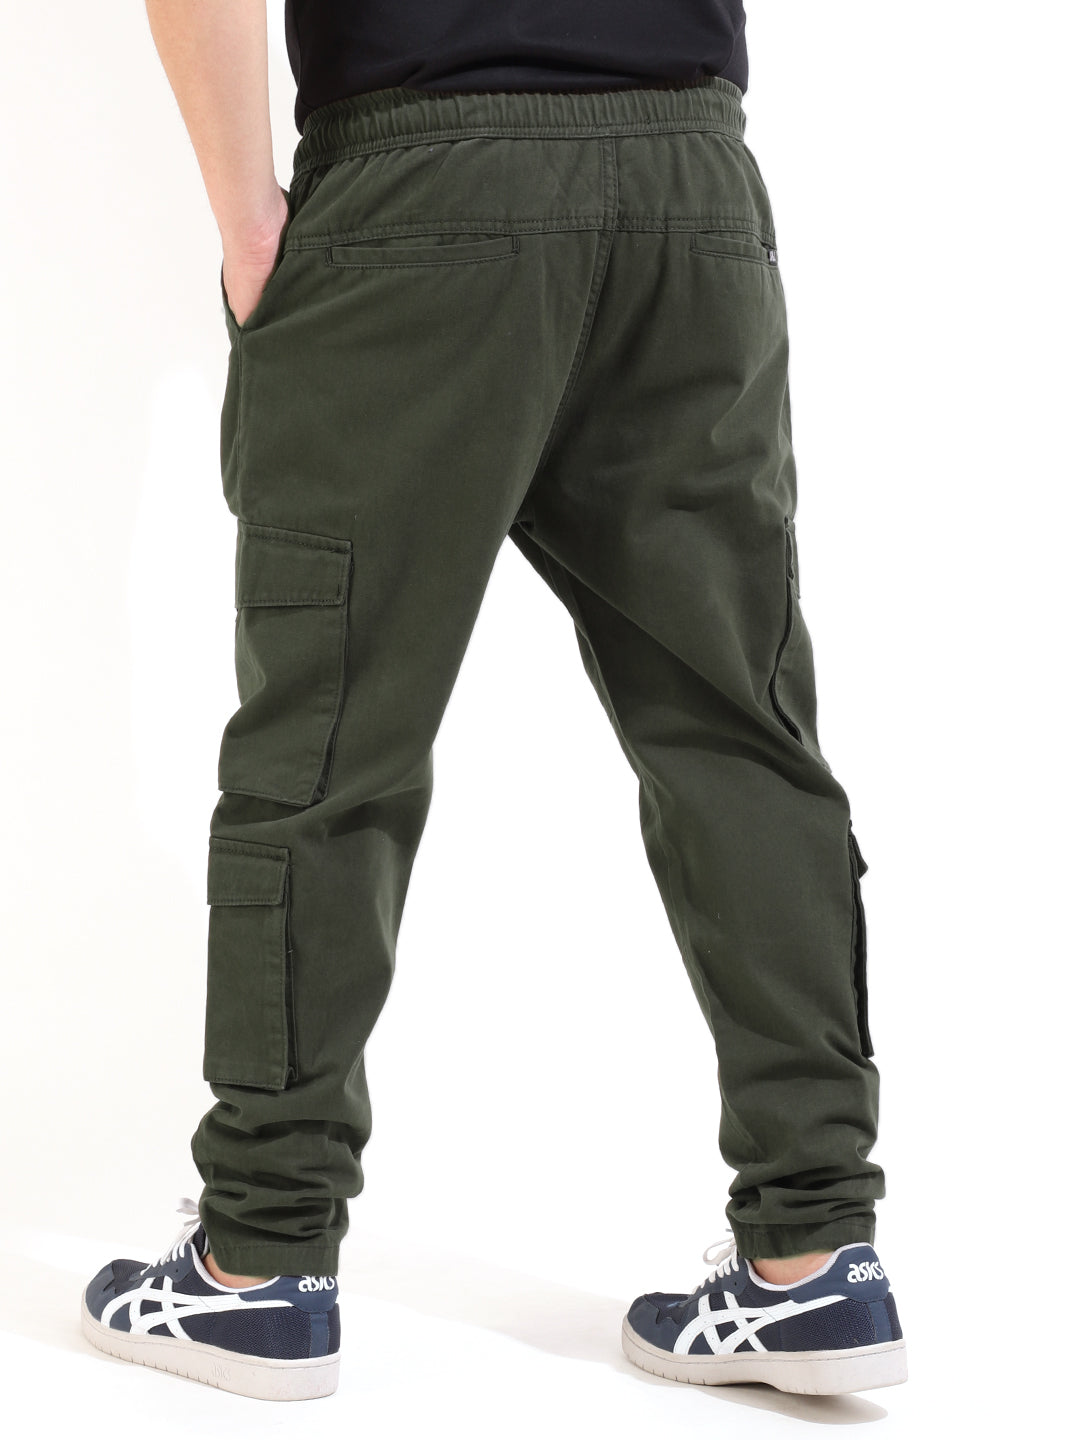 Olive 8 Pocket Cotton Twill Baggy Fit Cargo